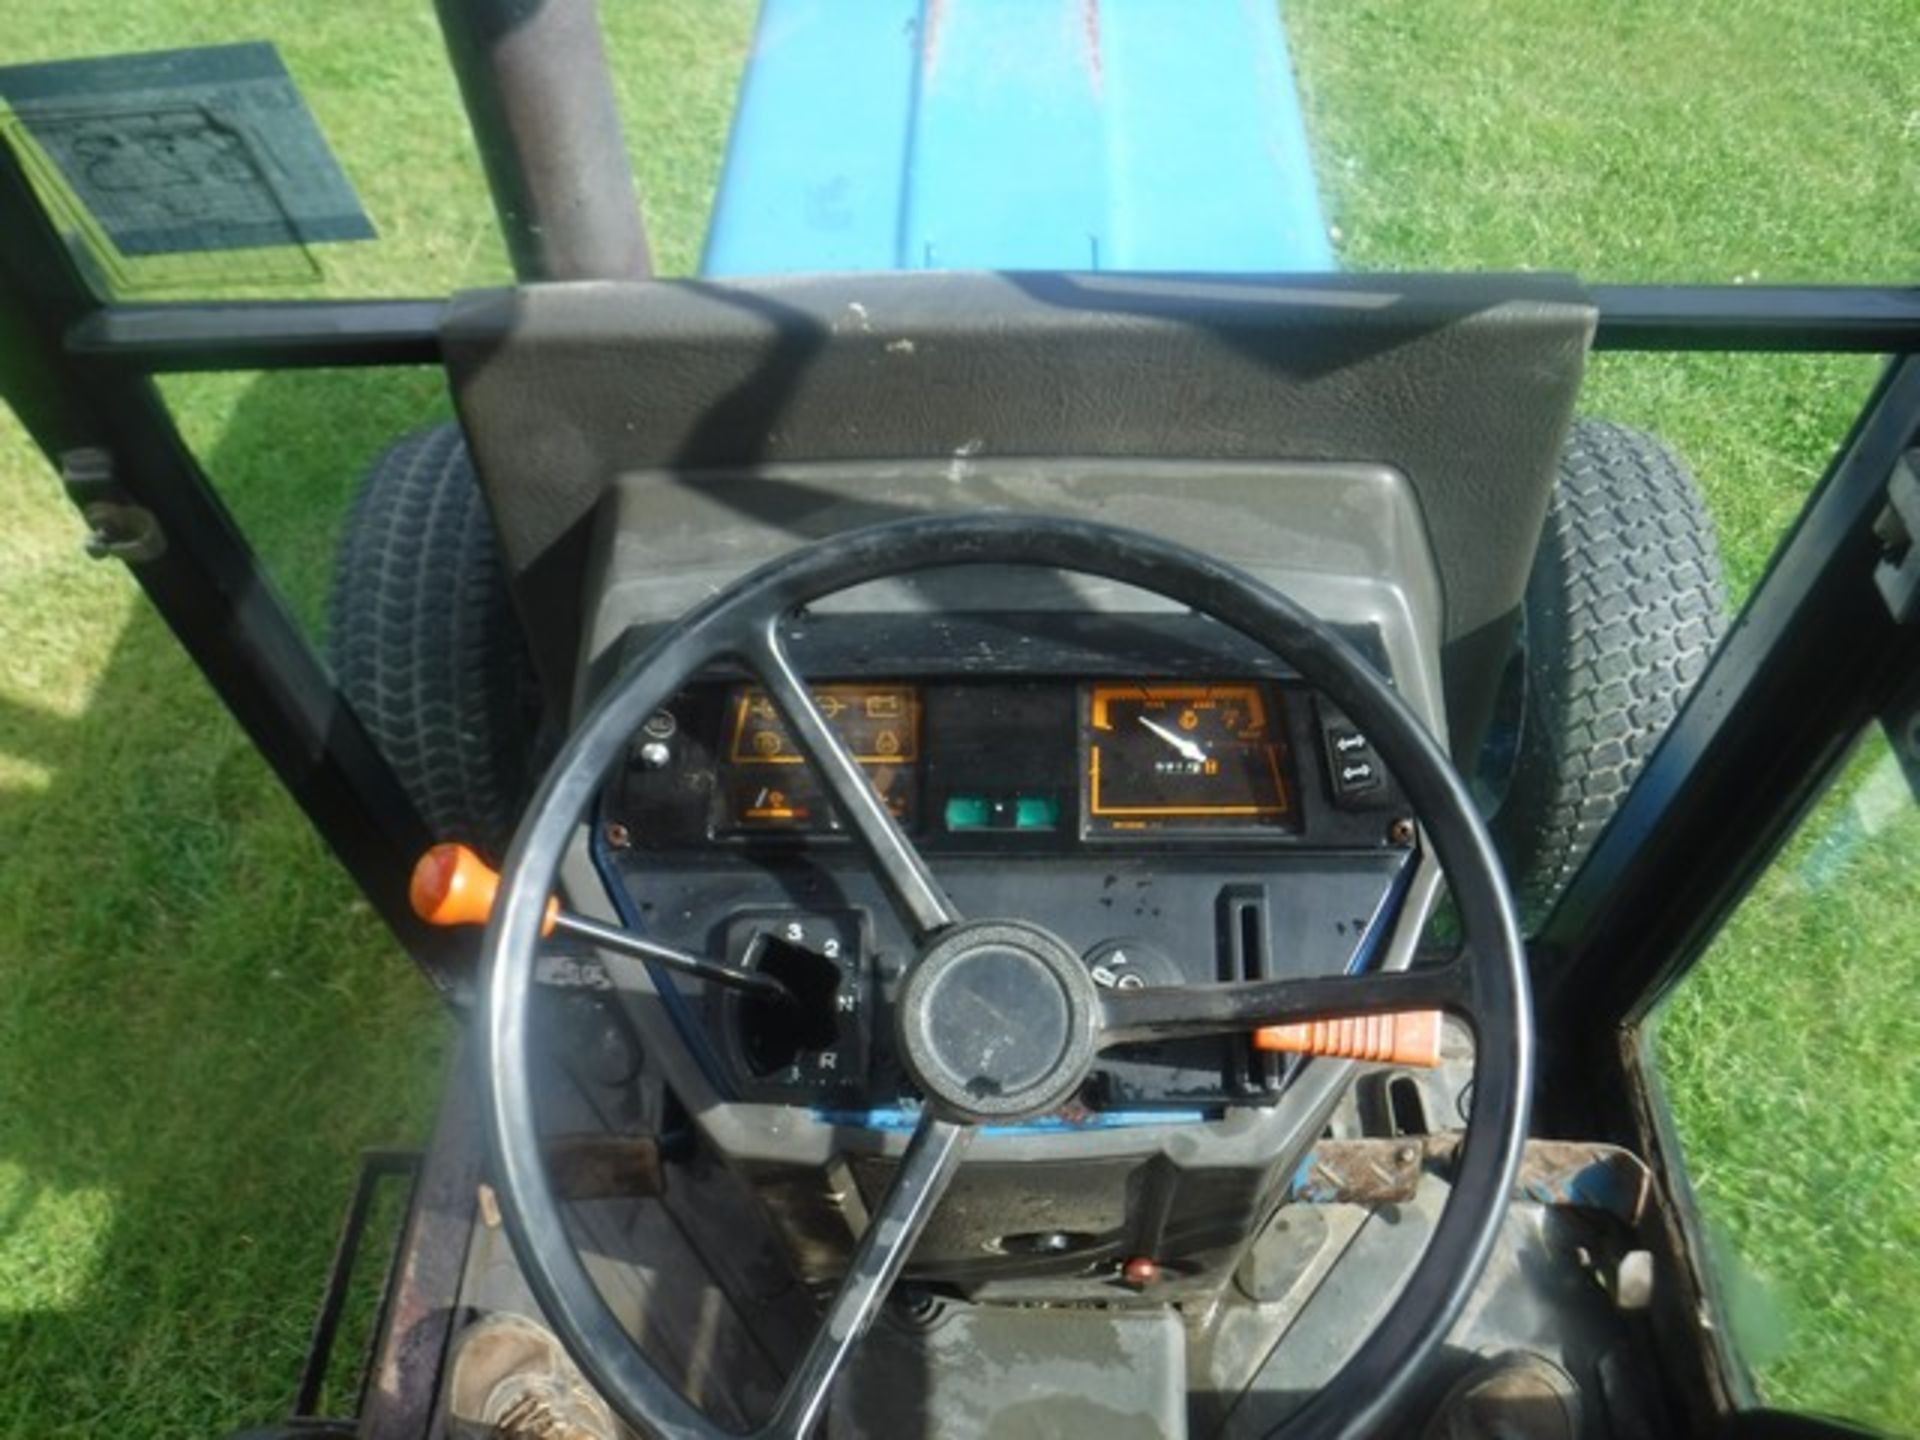 FORD 2120 4WD TRACTOR 1992 - 5917HRS (NOT VERIFIED) - Image 11 of 13